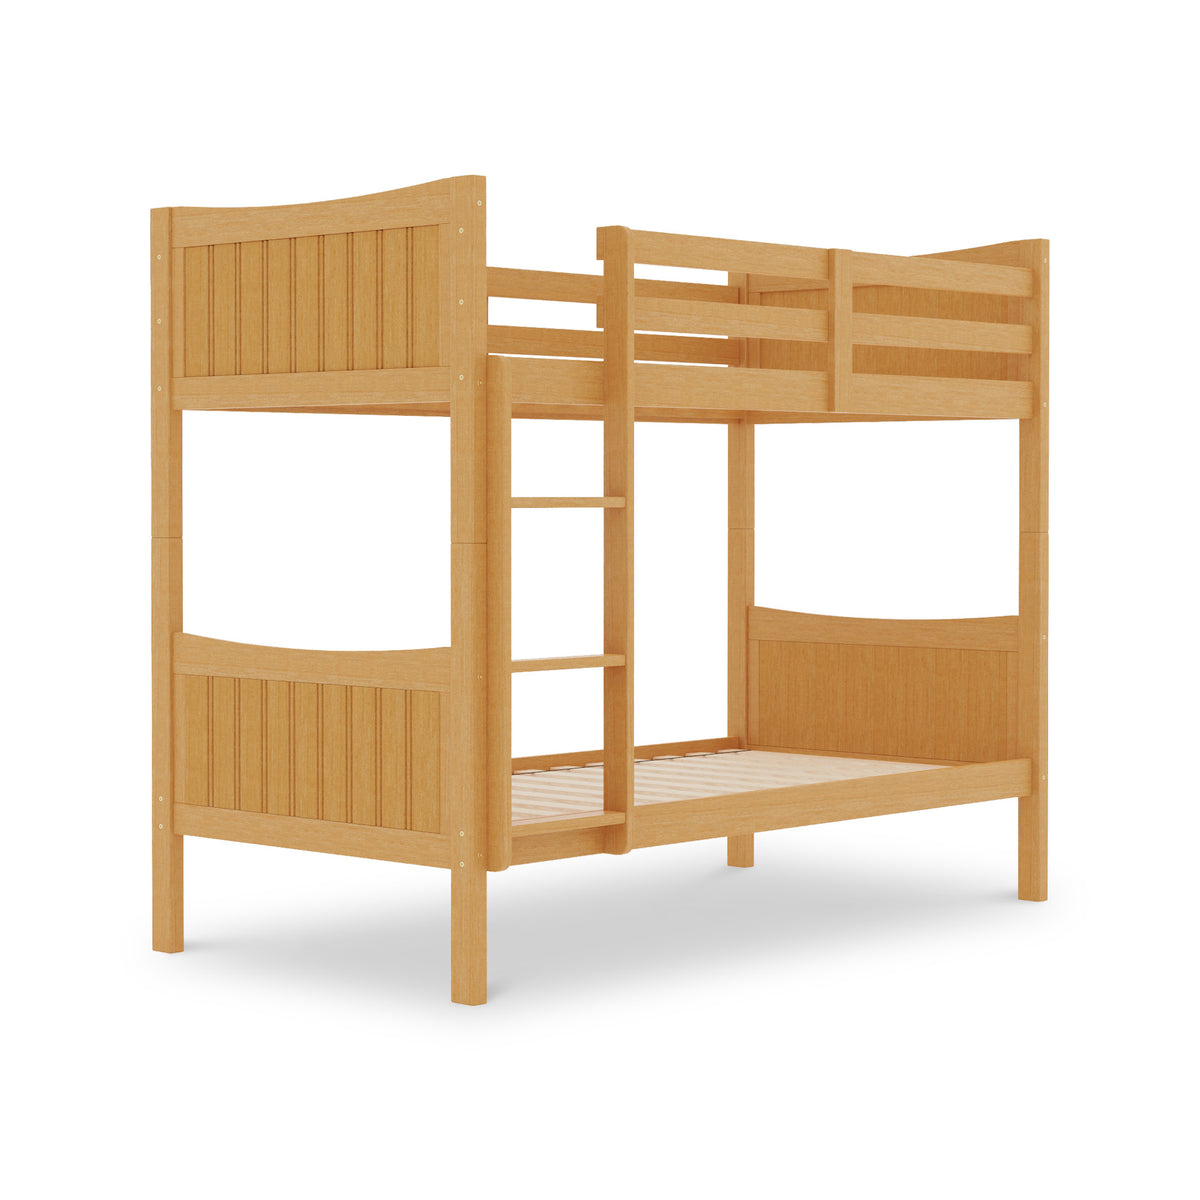 Finchley Wooden Bunk Bed from Roseland Furniture